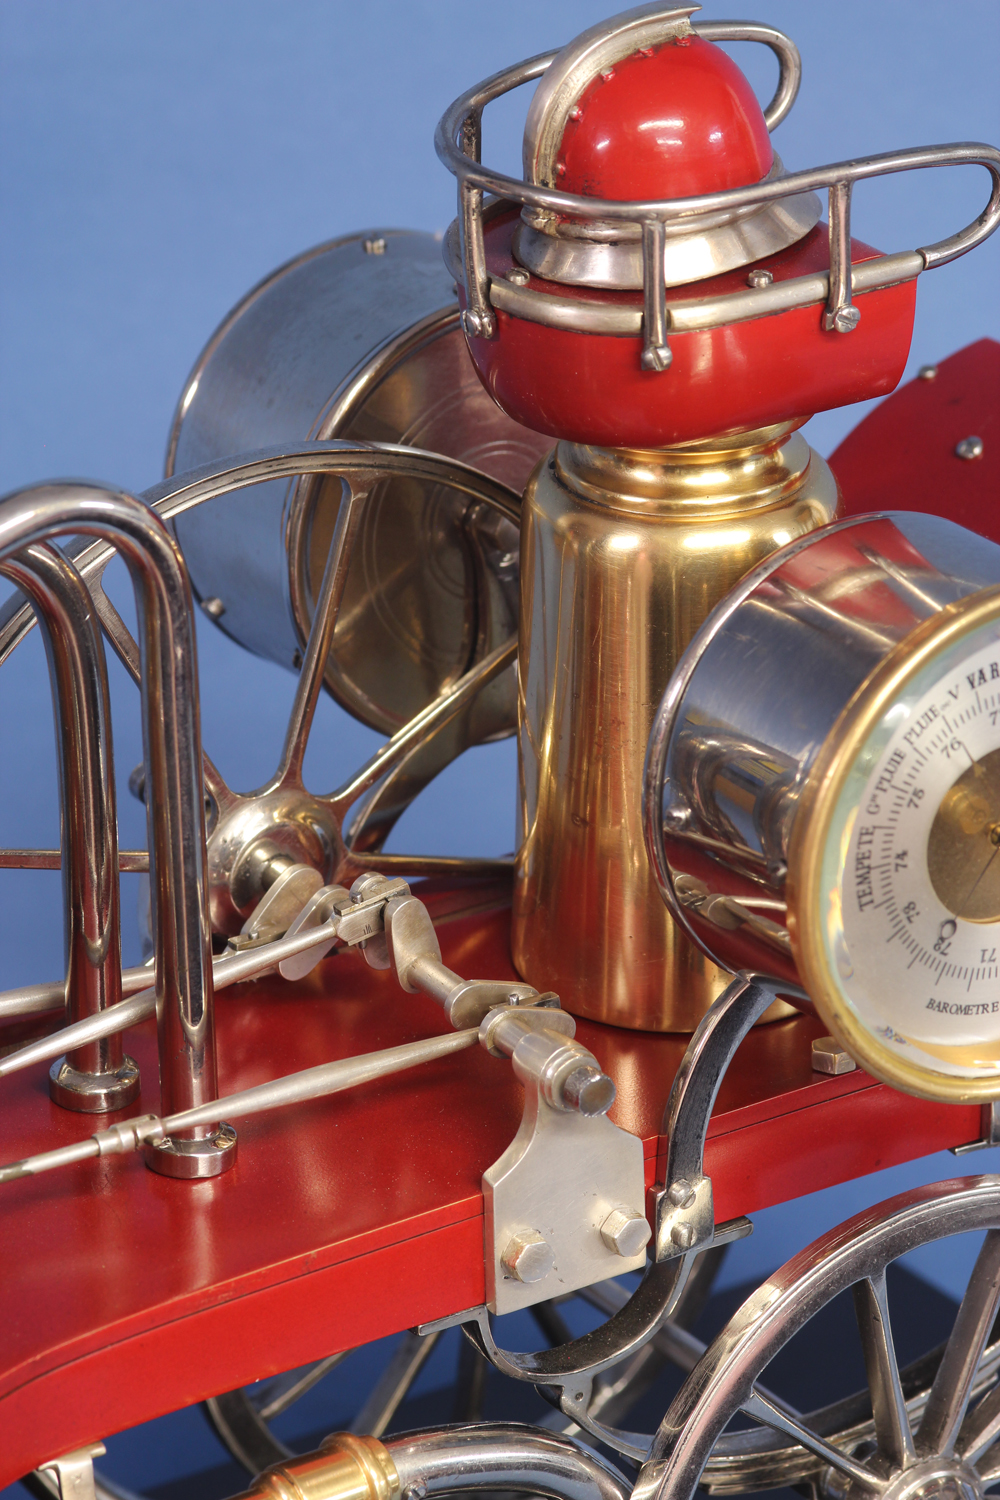 c.1900 French Industrial Fire Engine Clock